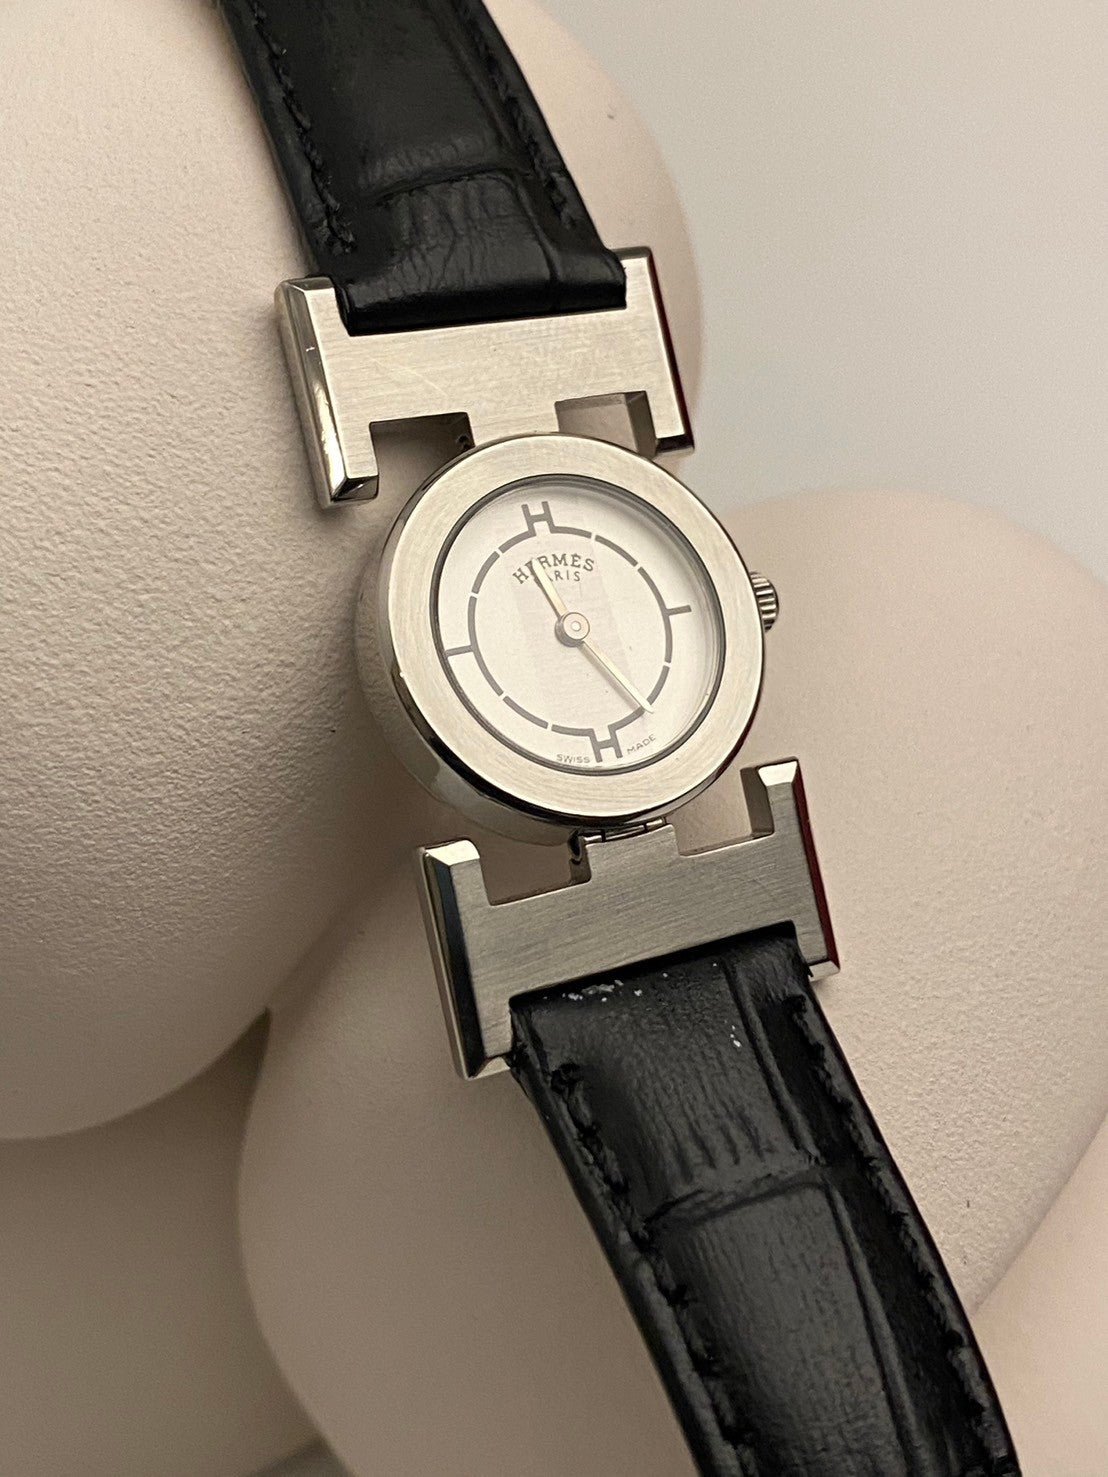 Hermes white dial leather strap